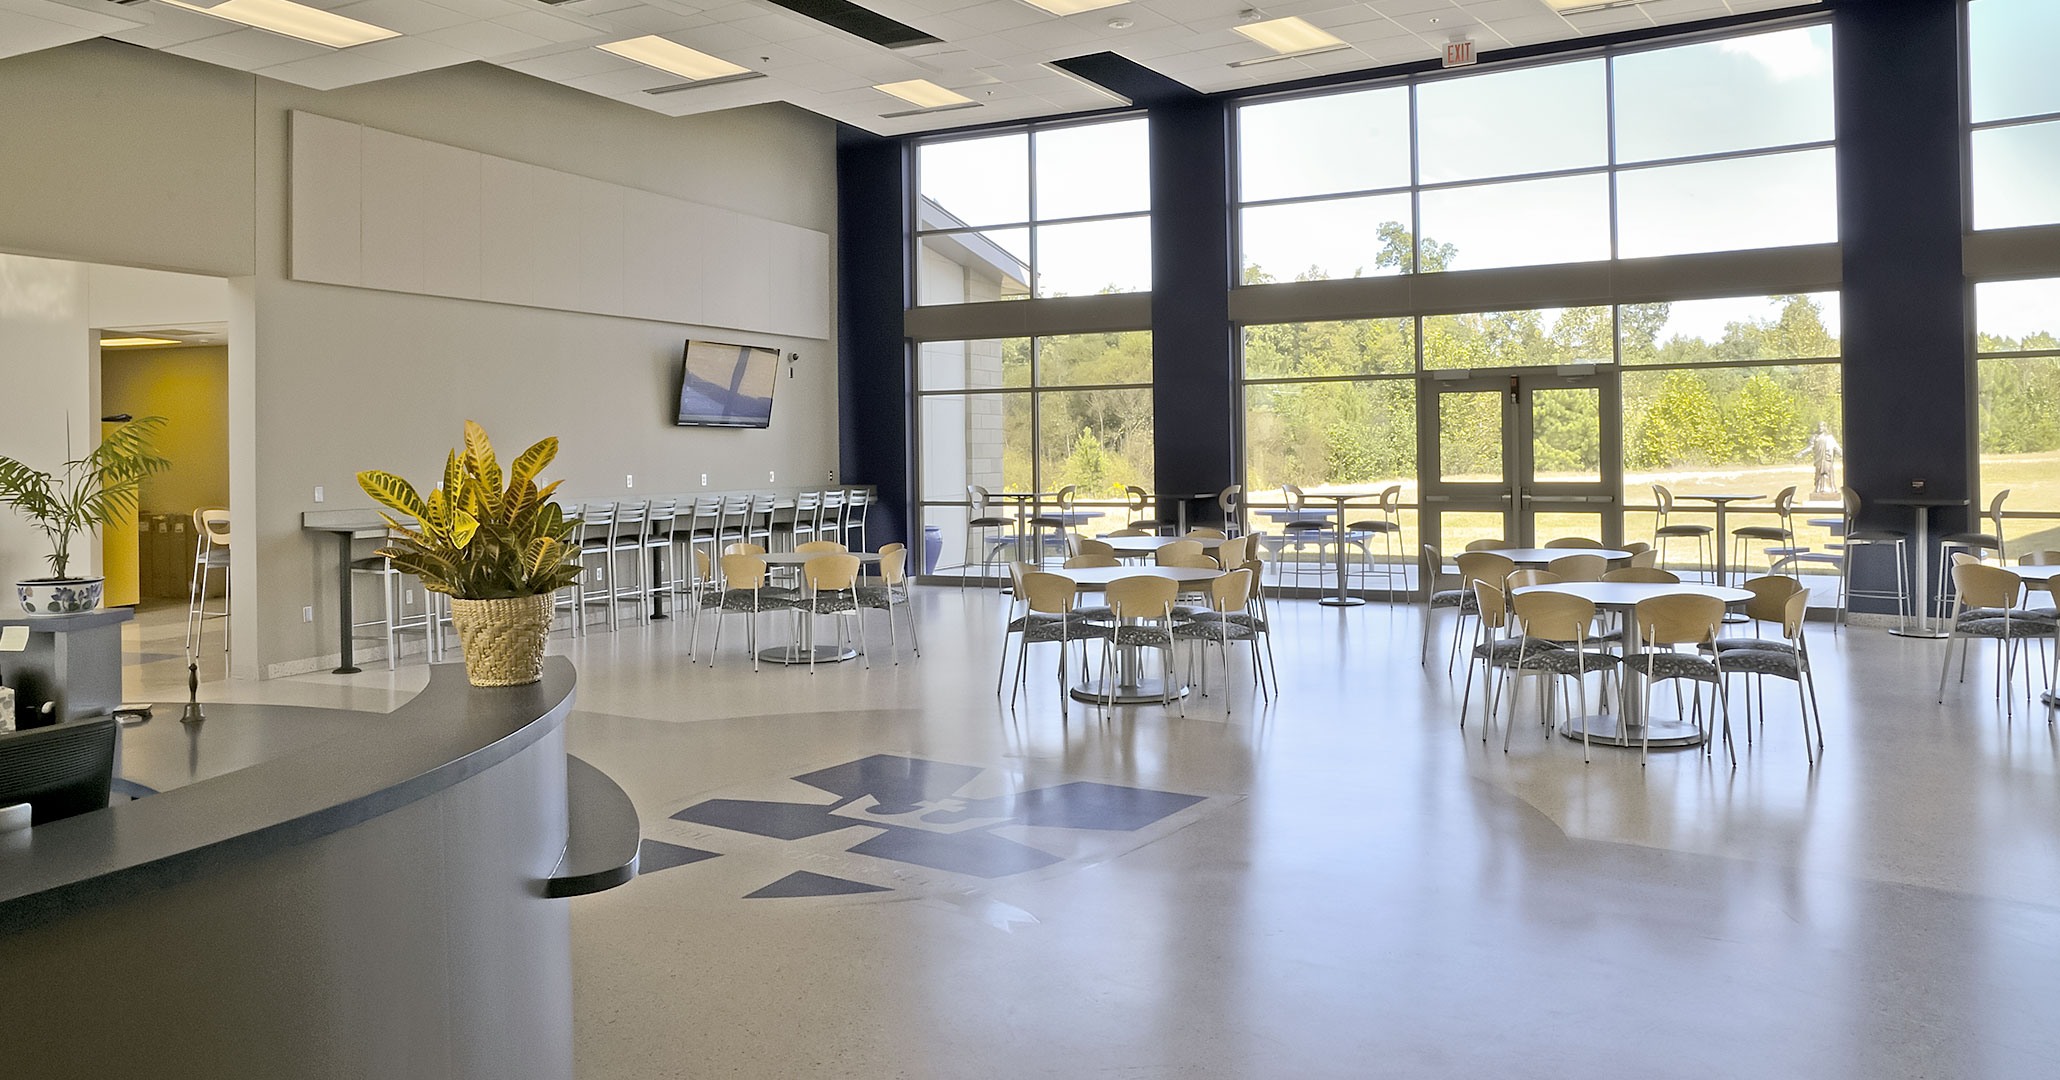 The Charlotte Diocese and Christ the King Catholic High School worked with Boudreaux master planners and architects to design an open modern entry where students gather to study.